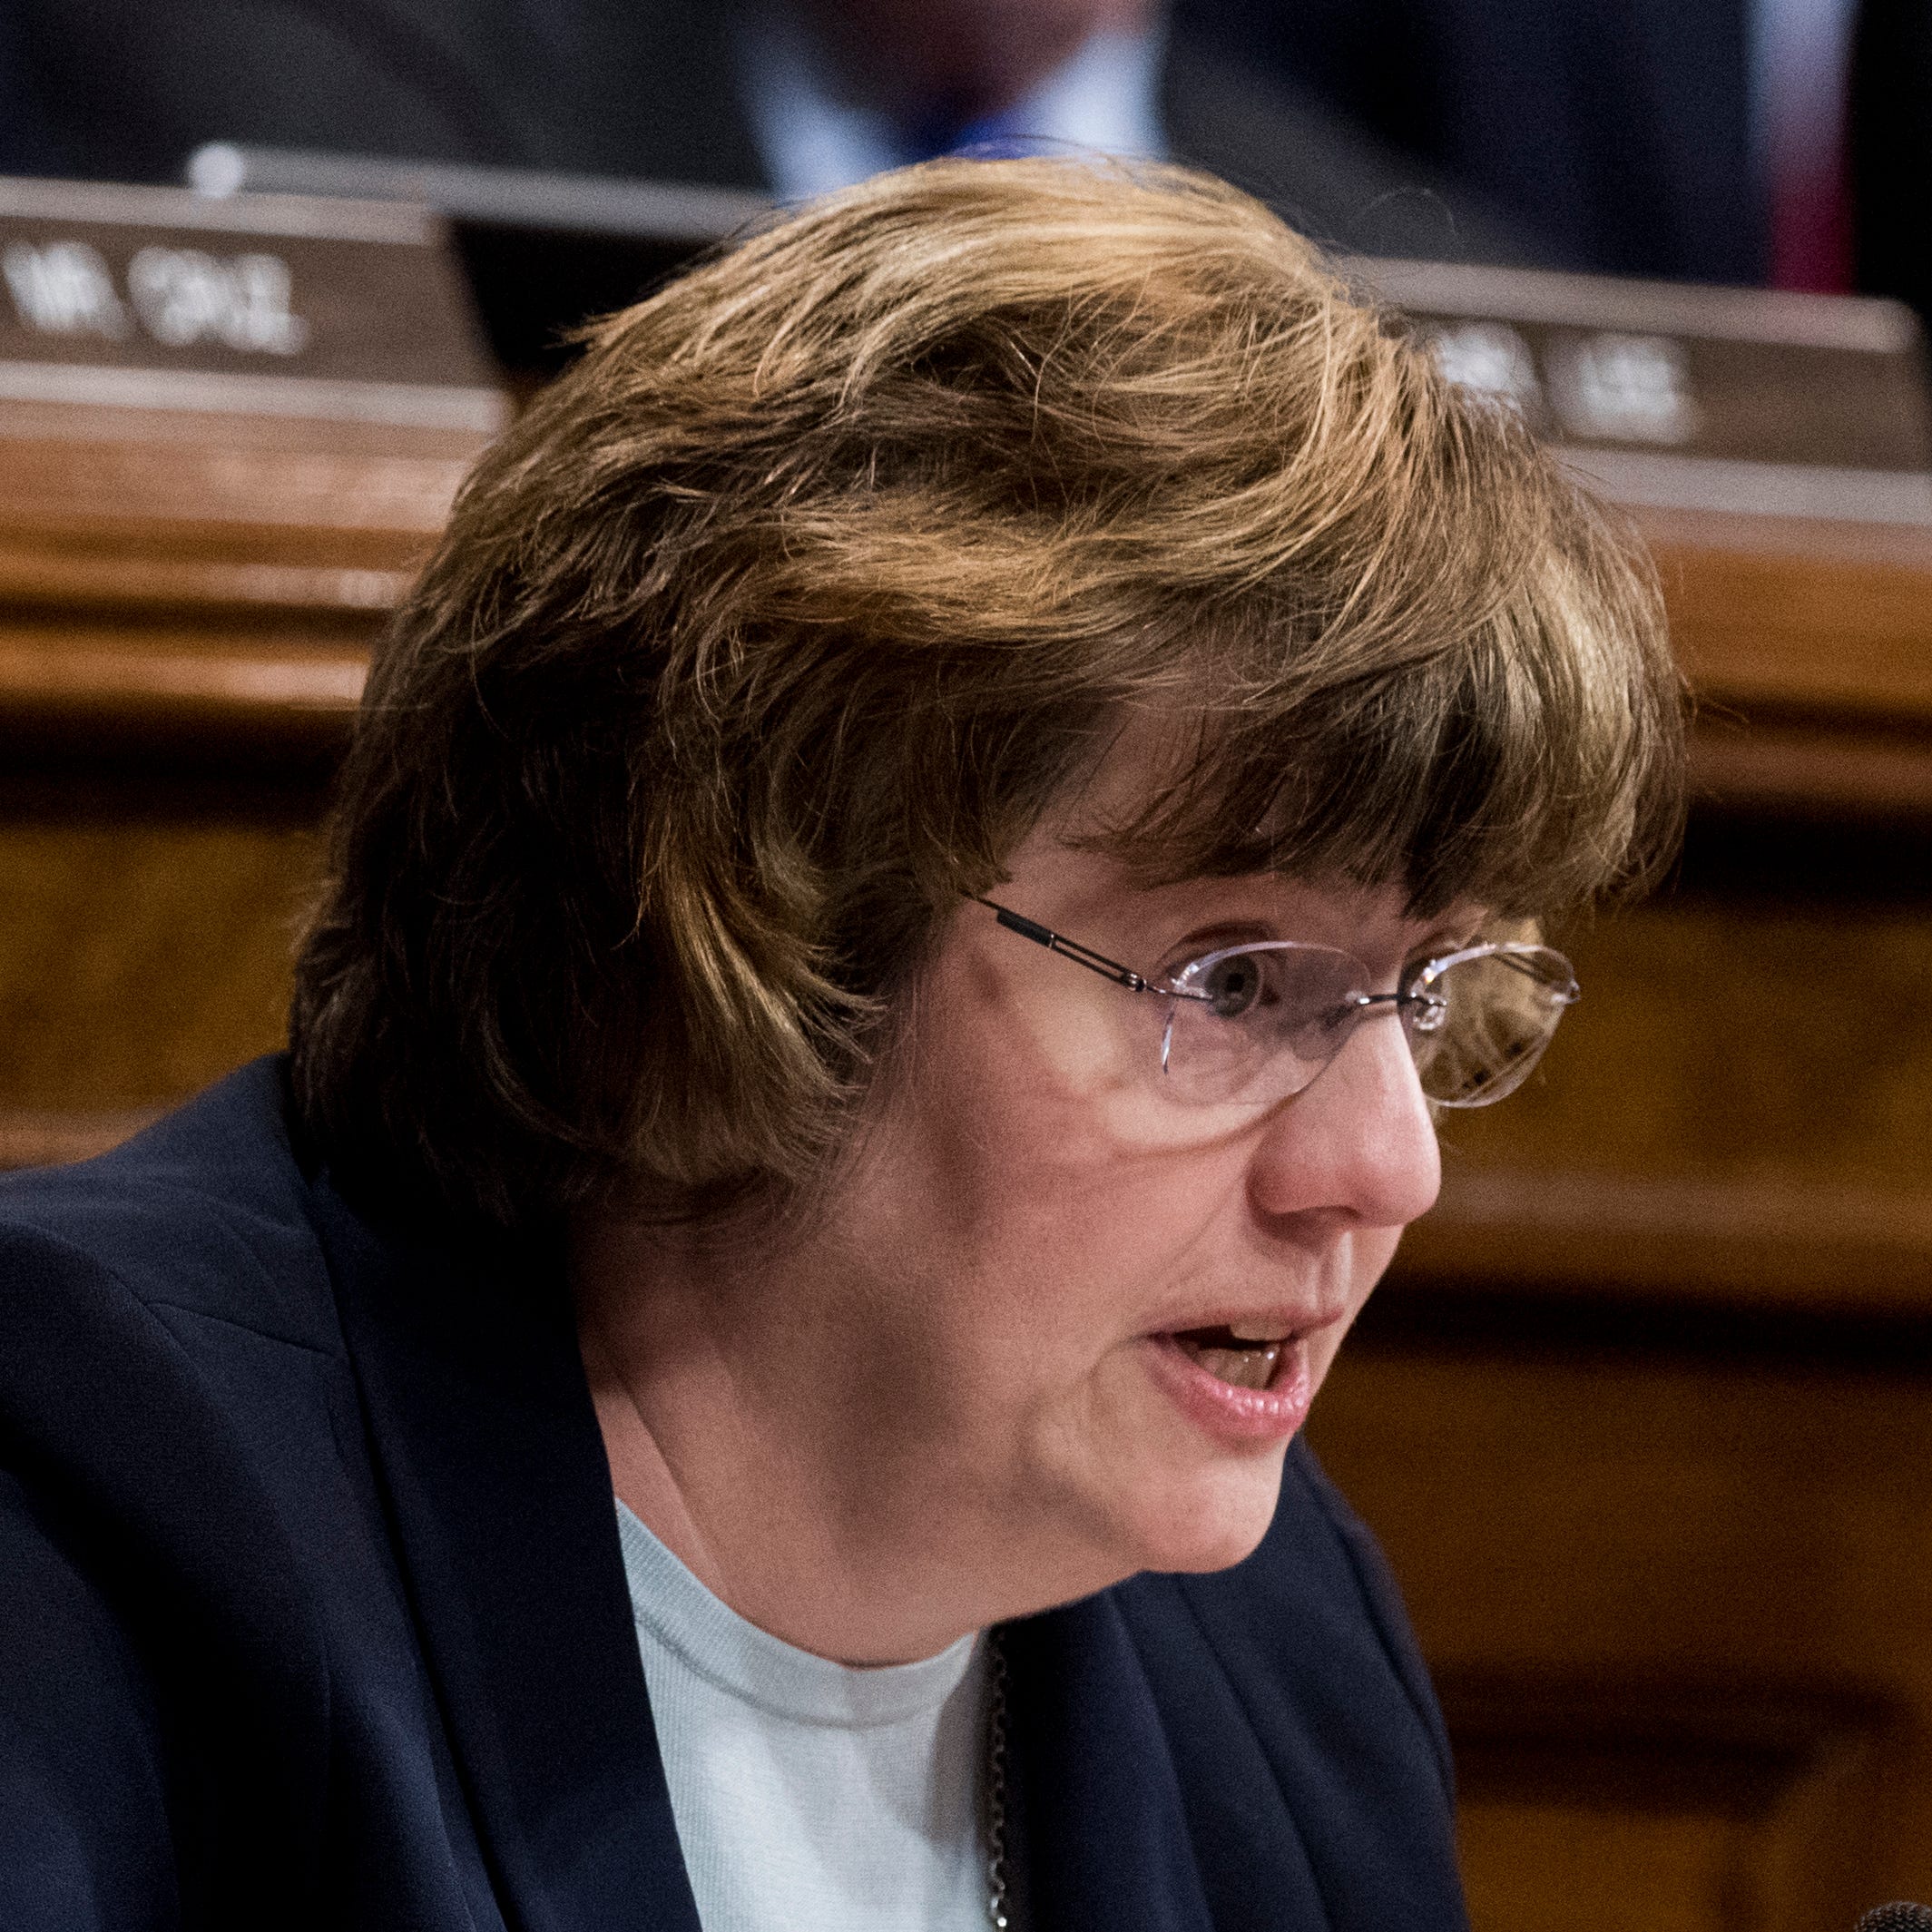 Rachel Mitchell, counsel for Senate Judiciary Committee Republicans, questions Dr. Christine Blasey Ford last Thursday during a committee hearing on the nomination of Brett Kavanaugh to be an associate justice of the Supreme Court.